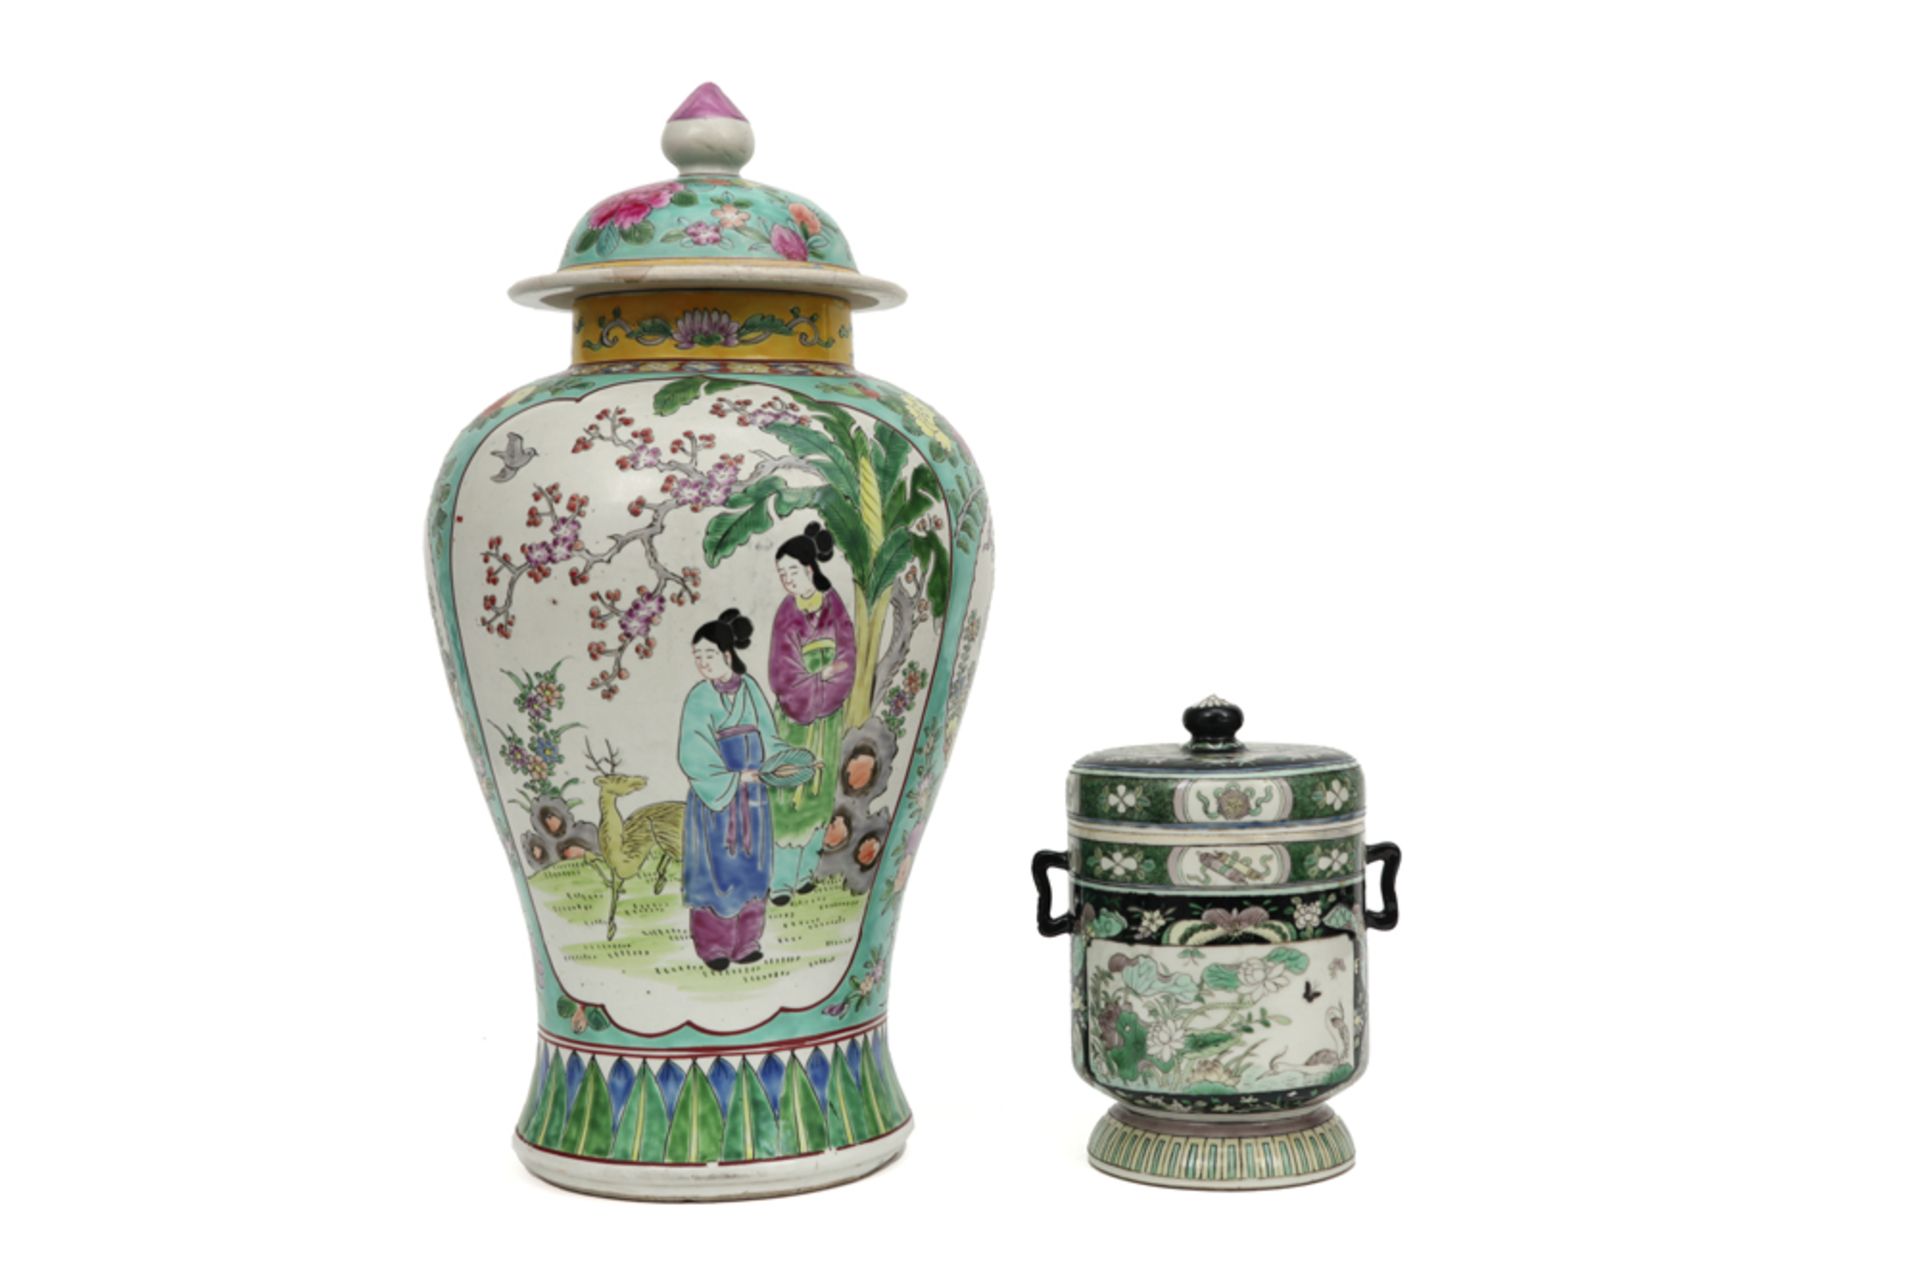 two Chinese vases (one lidded) in porcelain with a polychrome decor || Lot (2) van een Chinese